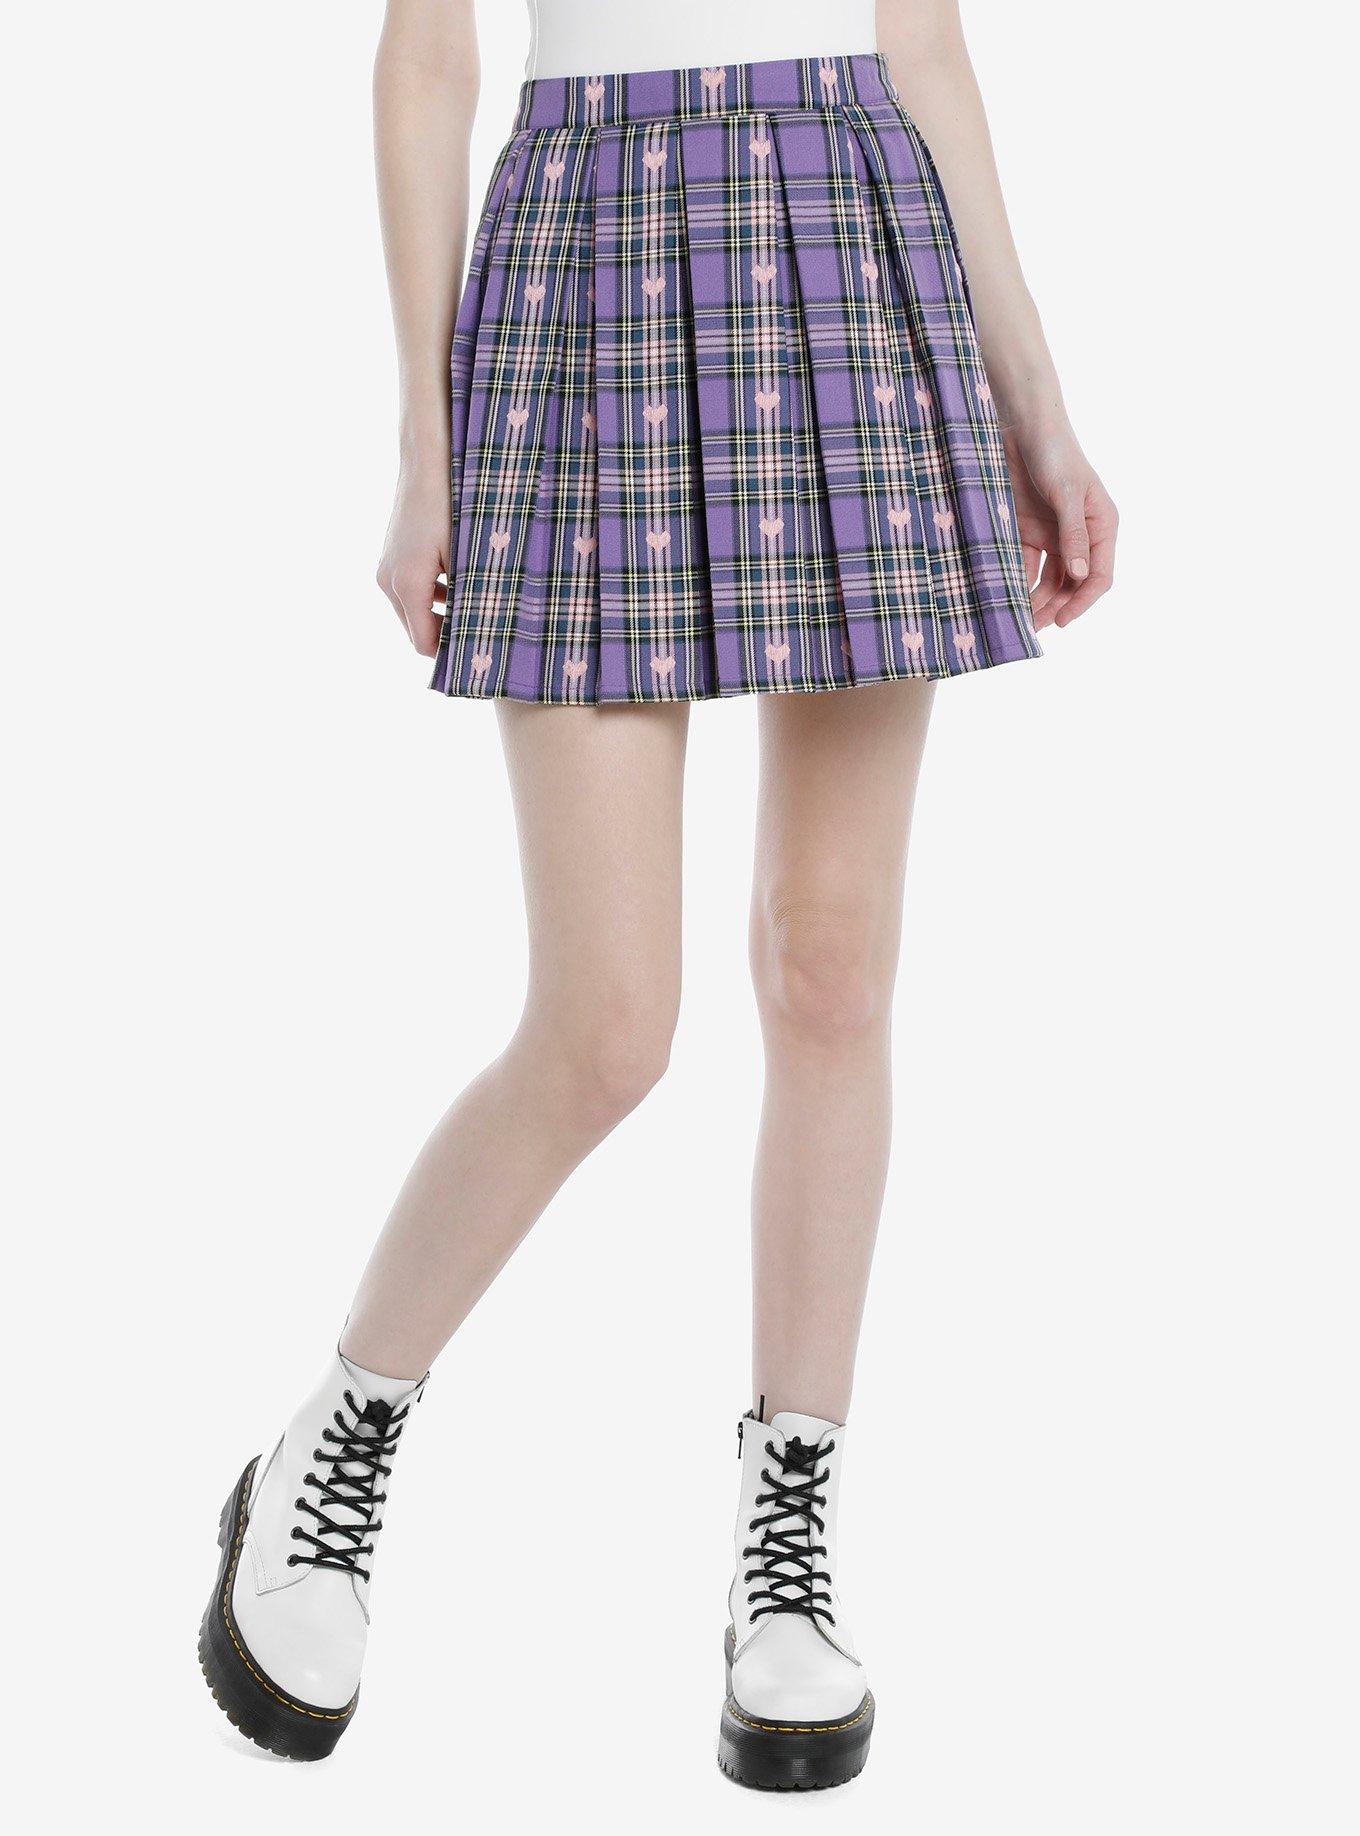 Pastel Plaid & Pink Hearts Skirt | Hot Topic